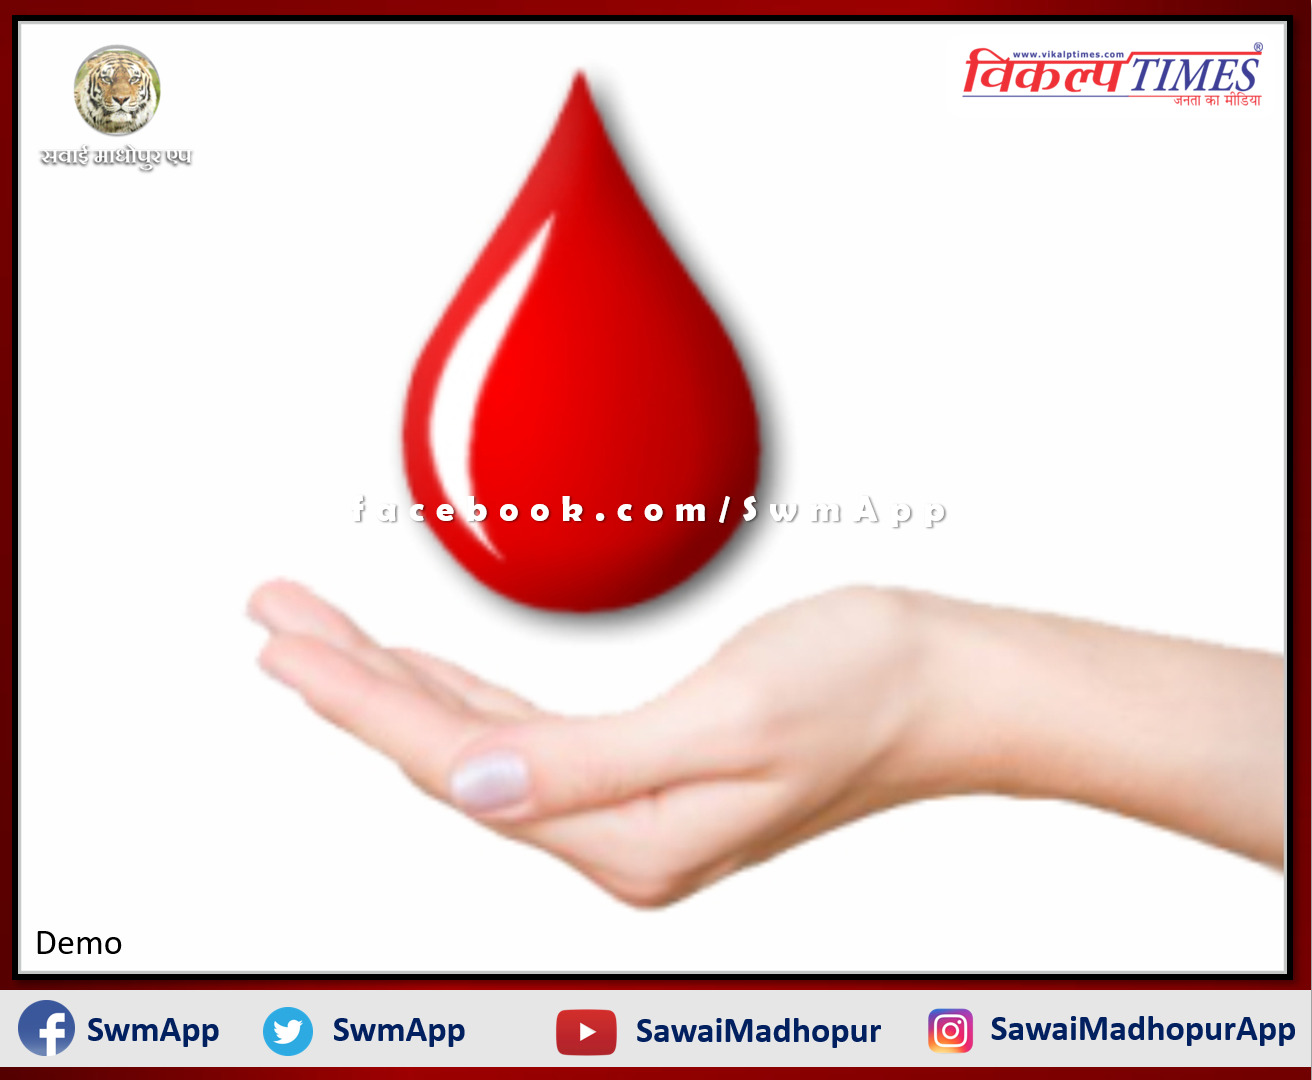 Voluntary blood donation camp will be organized on Friday in sawai madhopur